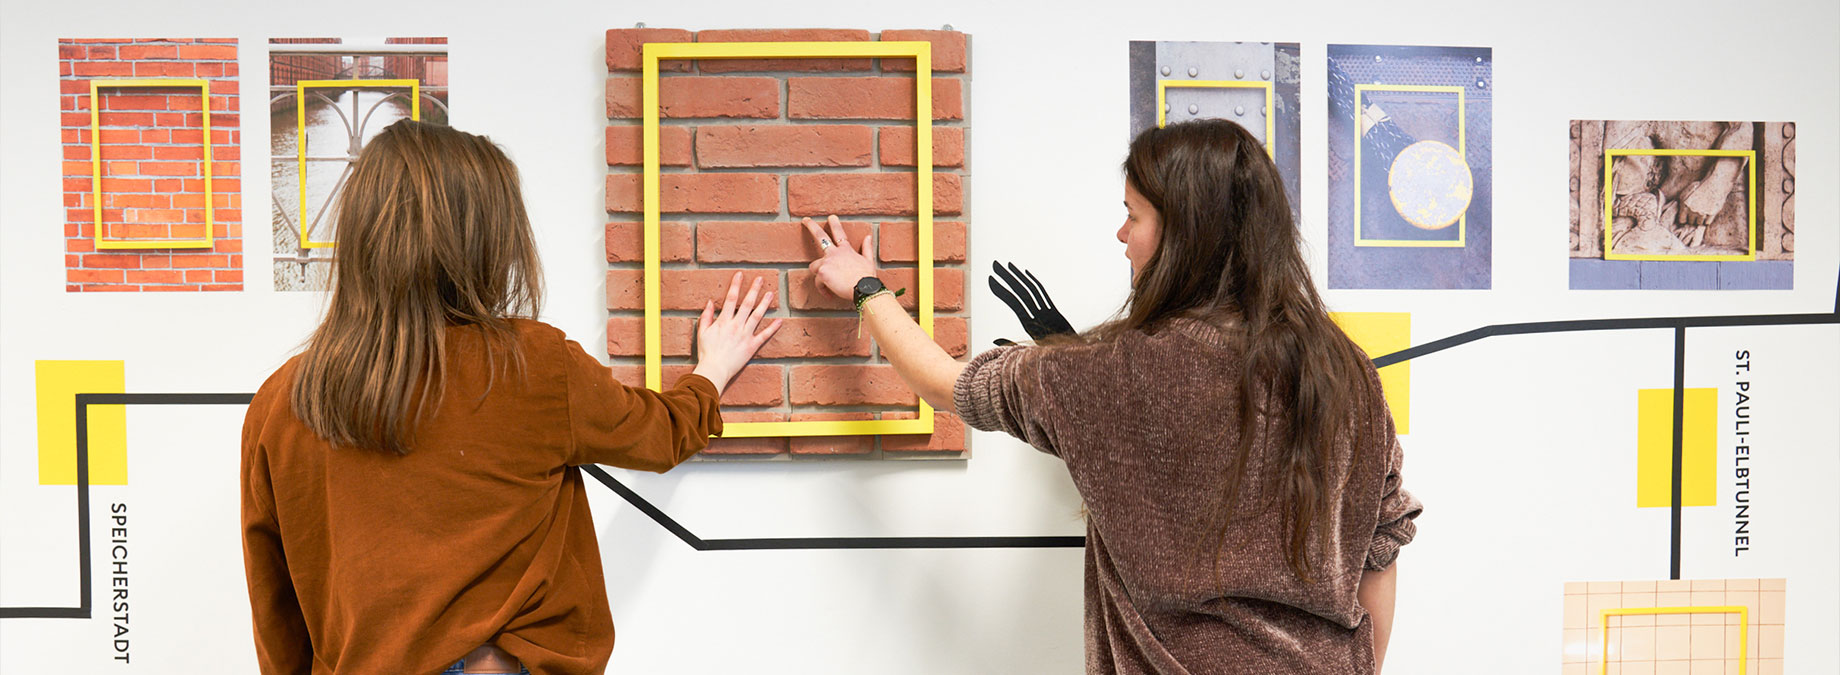 Students touching an art project